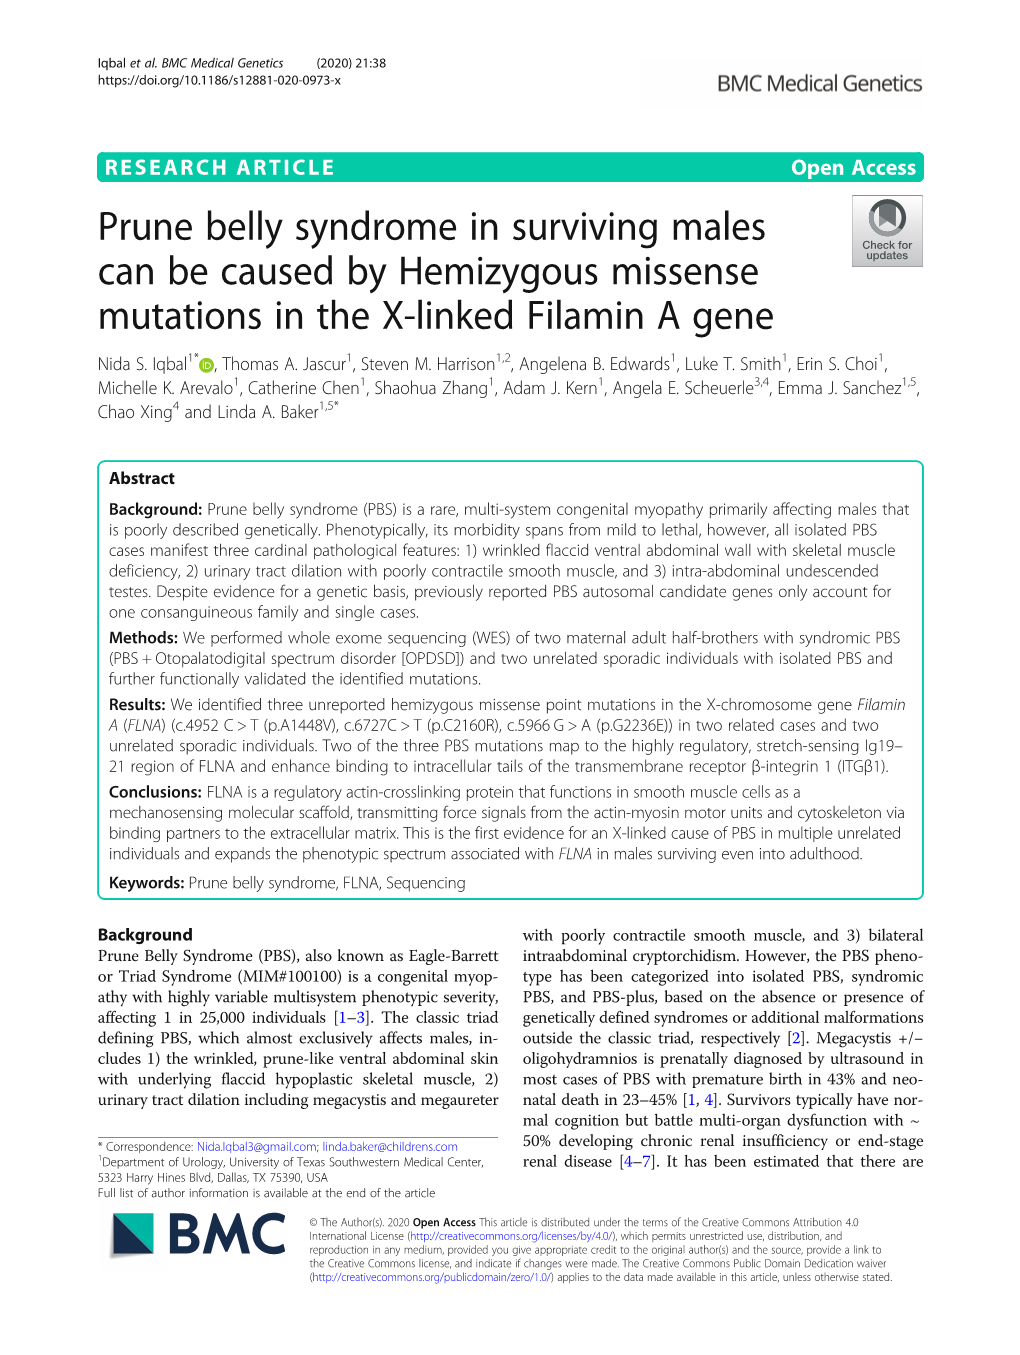 Prune Belly Syndrome in Surviving Males Can Be Caused by Hemizygous Missense Mutations in the X-Linked Filamin a Gene Nida S